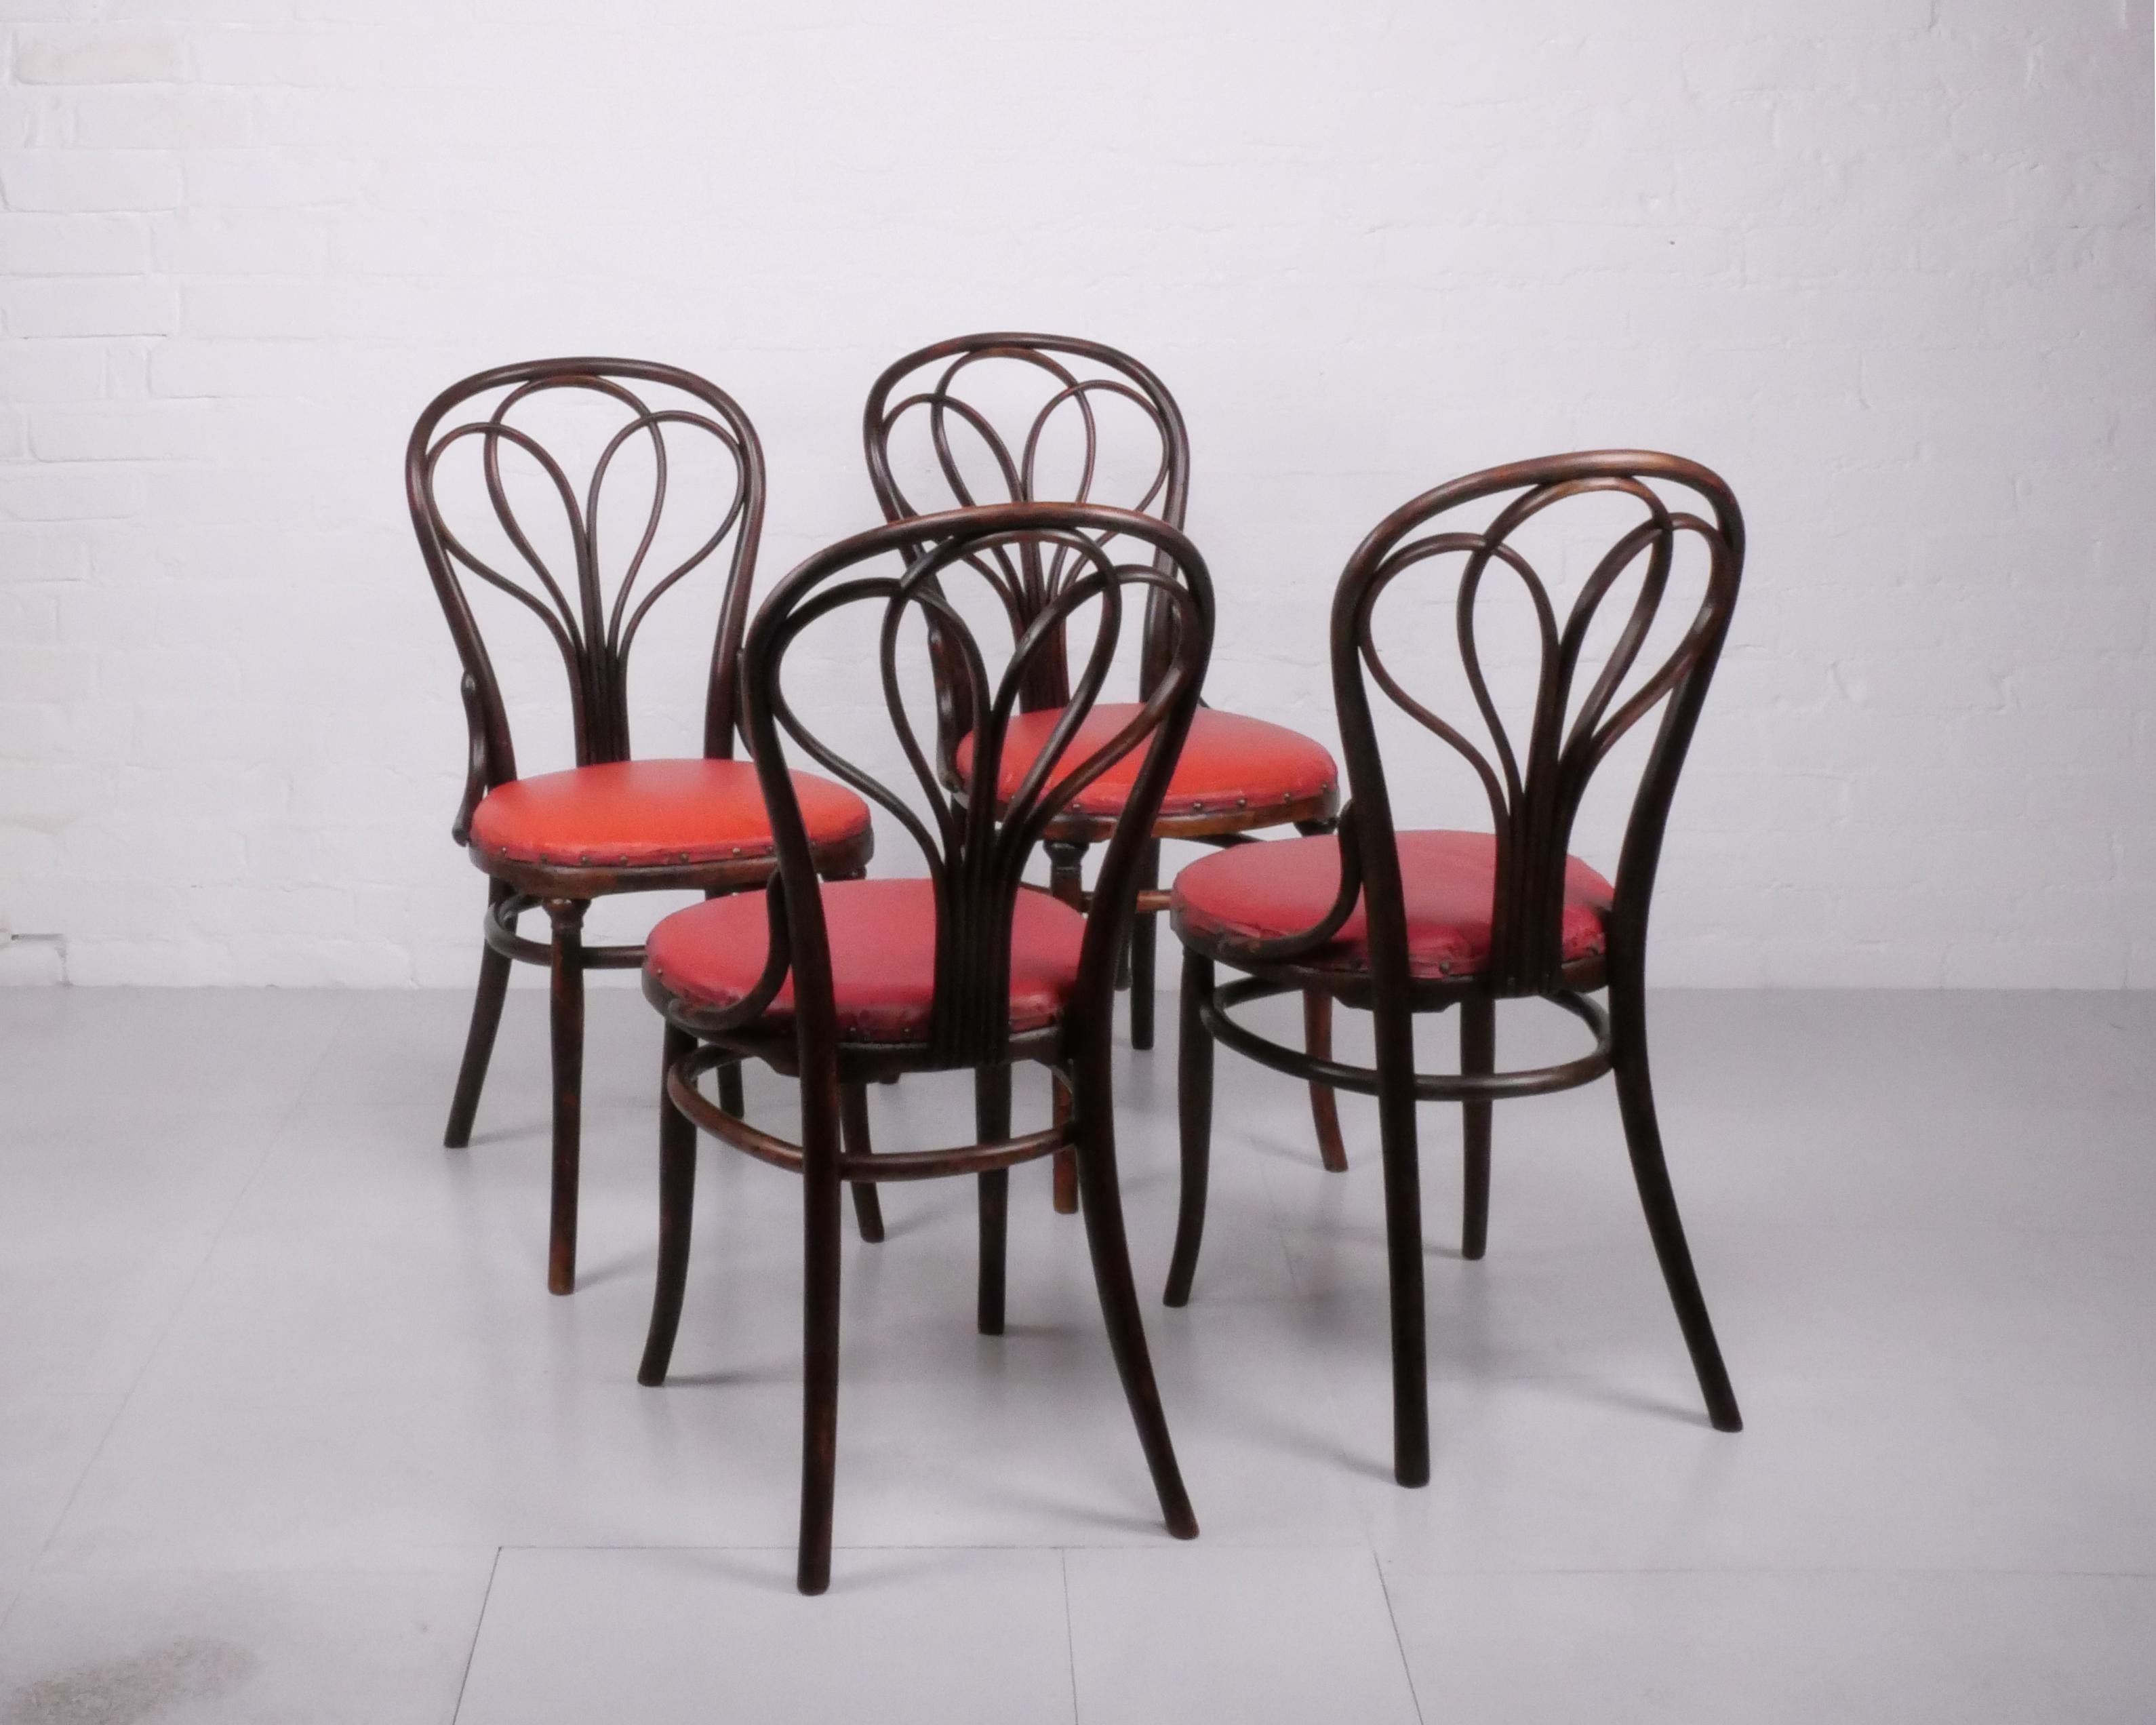 Gebrüder Thonet (Manufacturer), Austria

Thonet no. 25 dining chair, set of 4, produced from c. 1875 to 1911.

Bentwood frames with original dark finish, period upholstered seats

This is a beautiful, rare set of one of the most sought after early